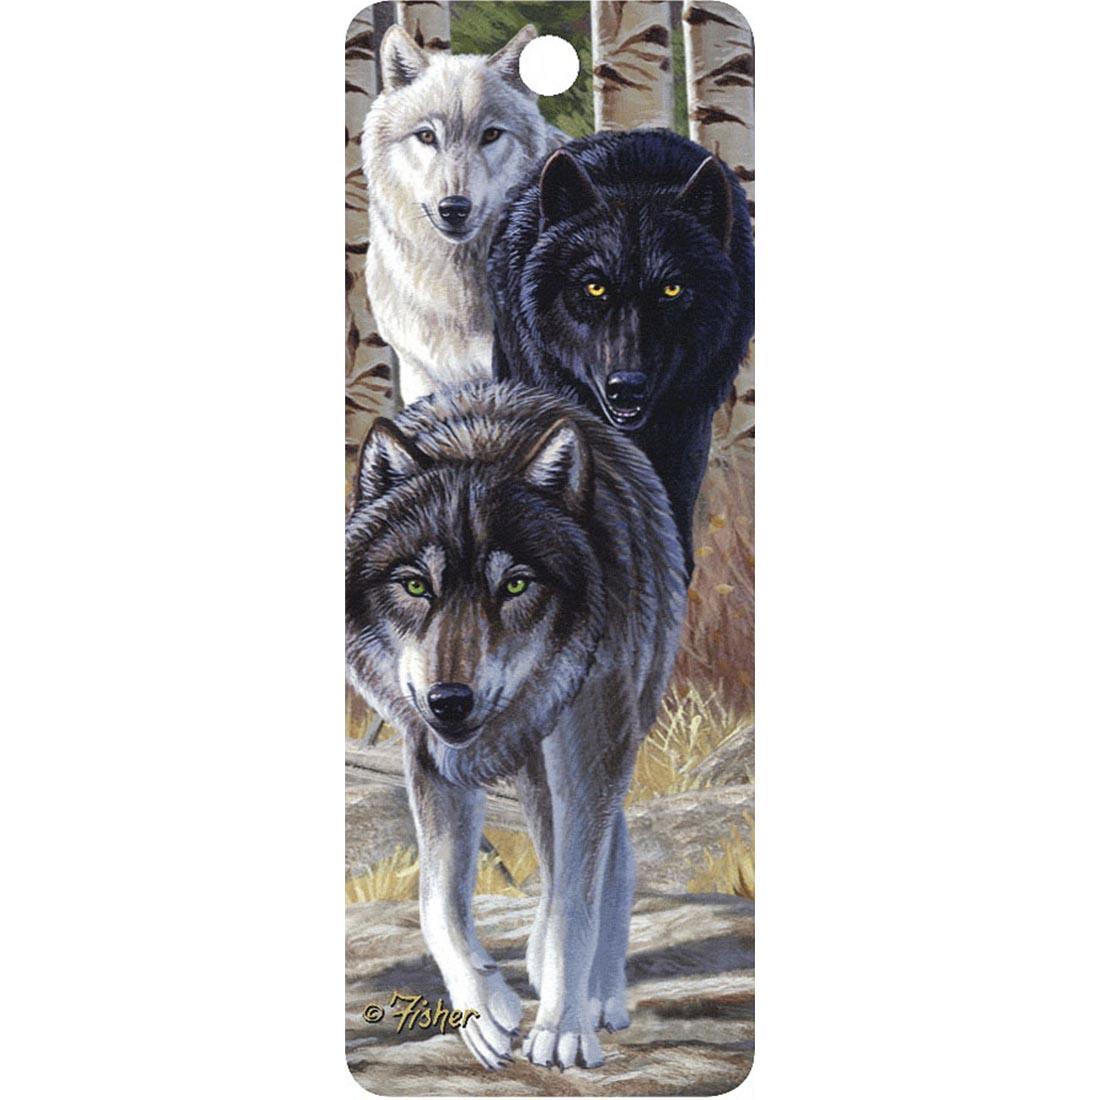 Leader of The Pack (Wolves) 3D Bookmark